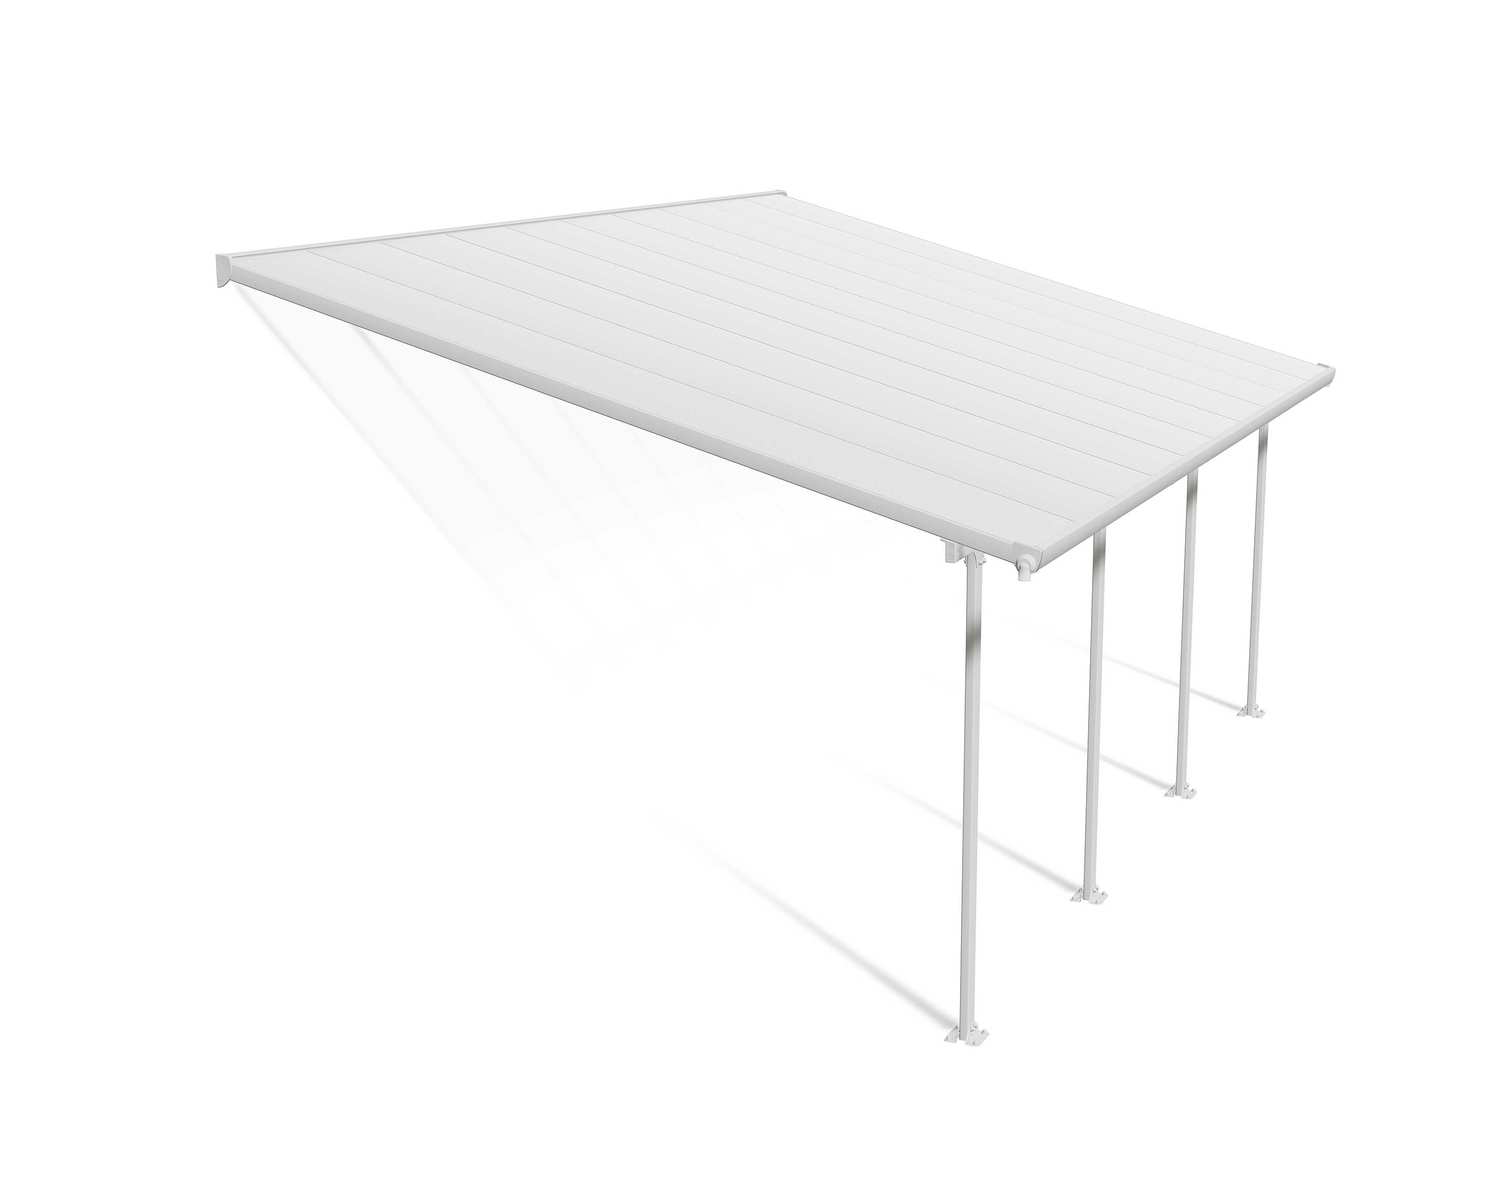 Feria 13 ft. x 20 ft. White Aluminium Patio Cover With 4 Posts, White Twin-Wall Polycarbonate Roof Panels.